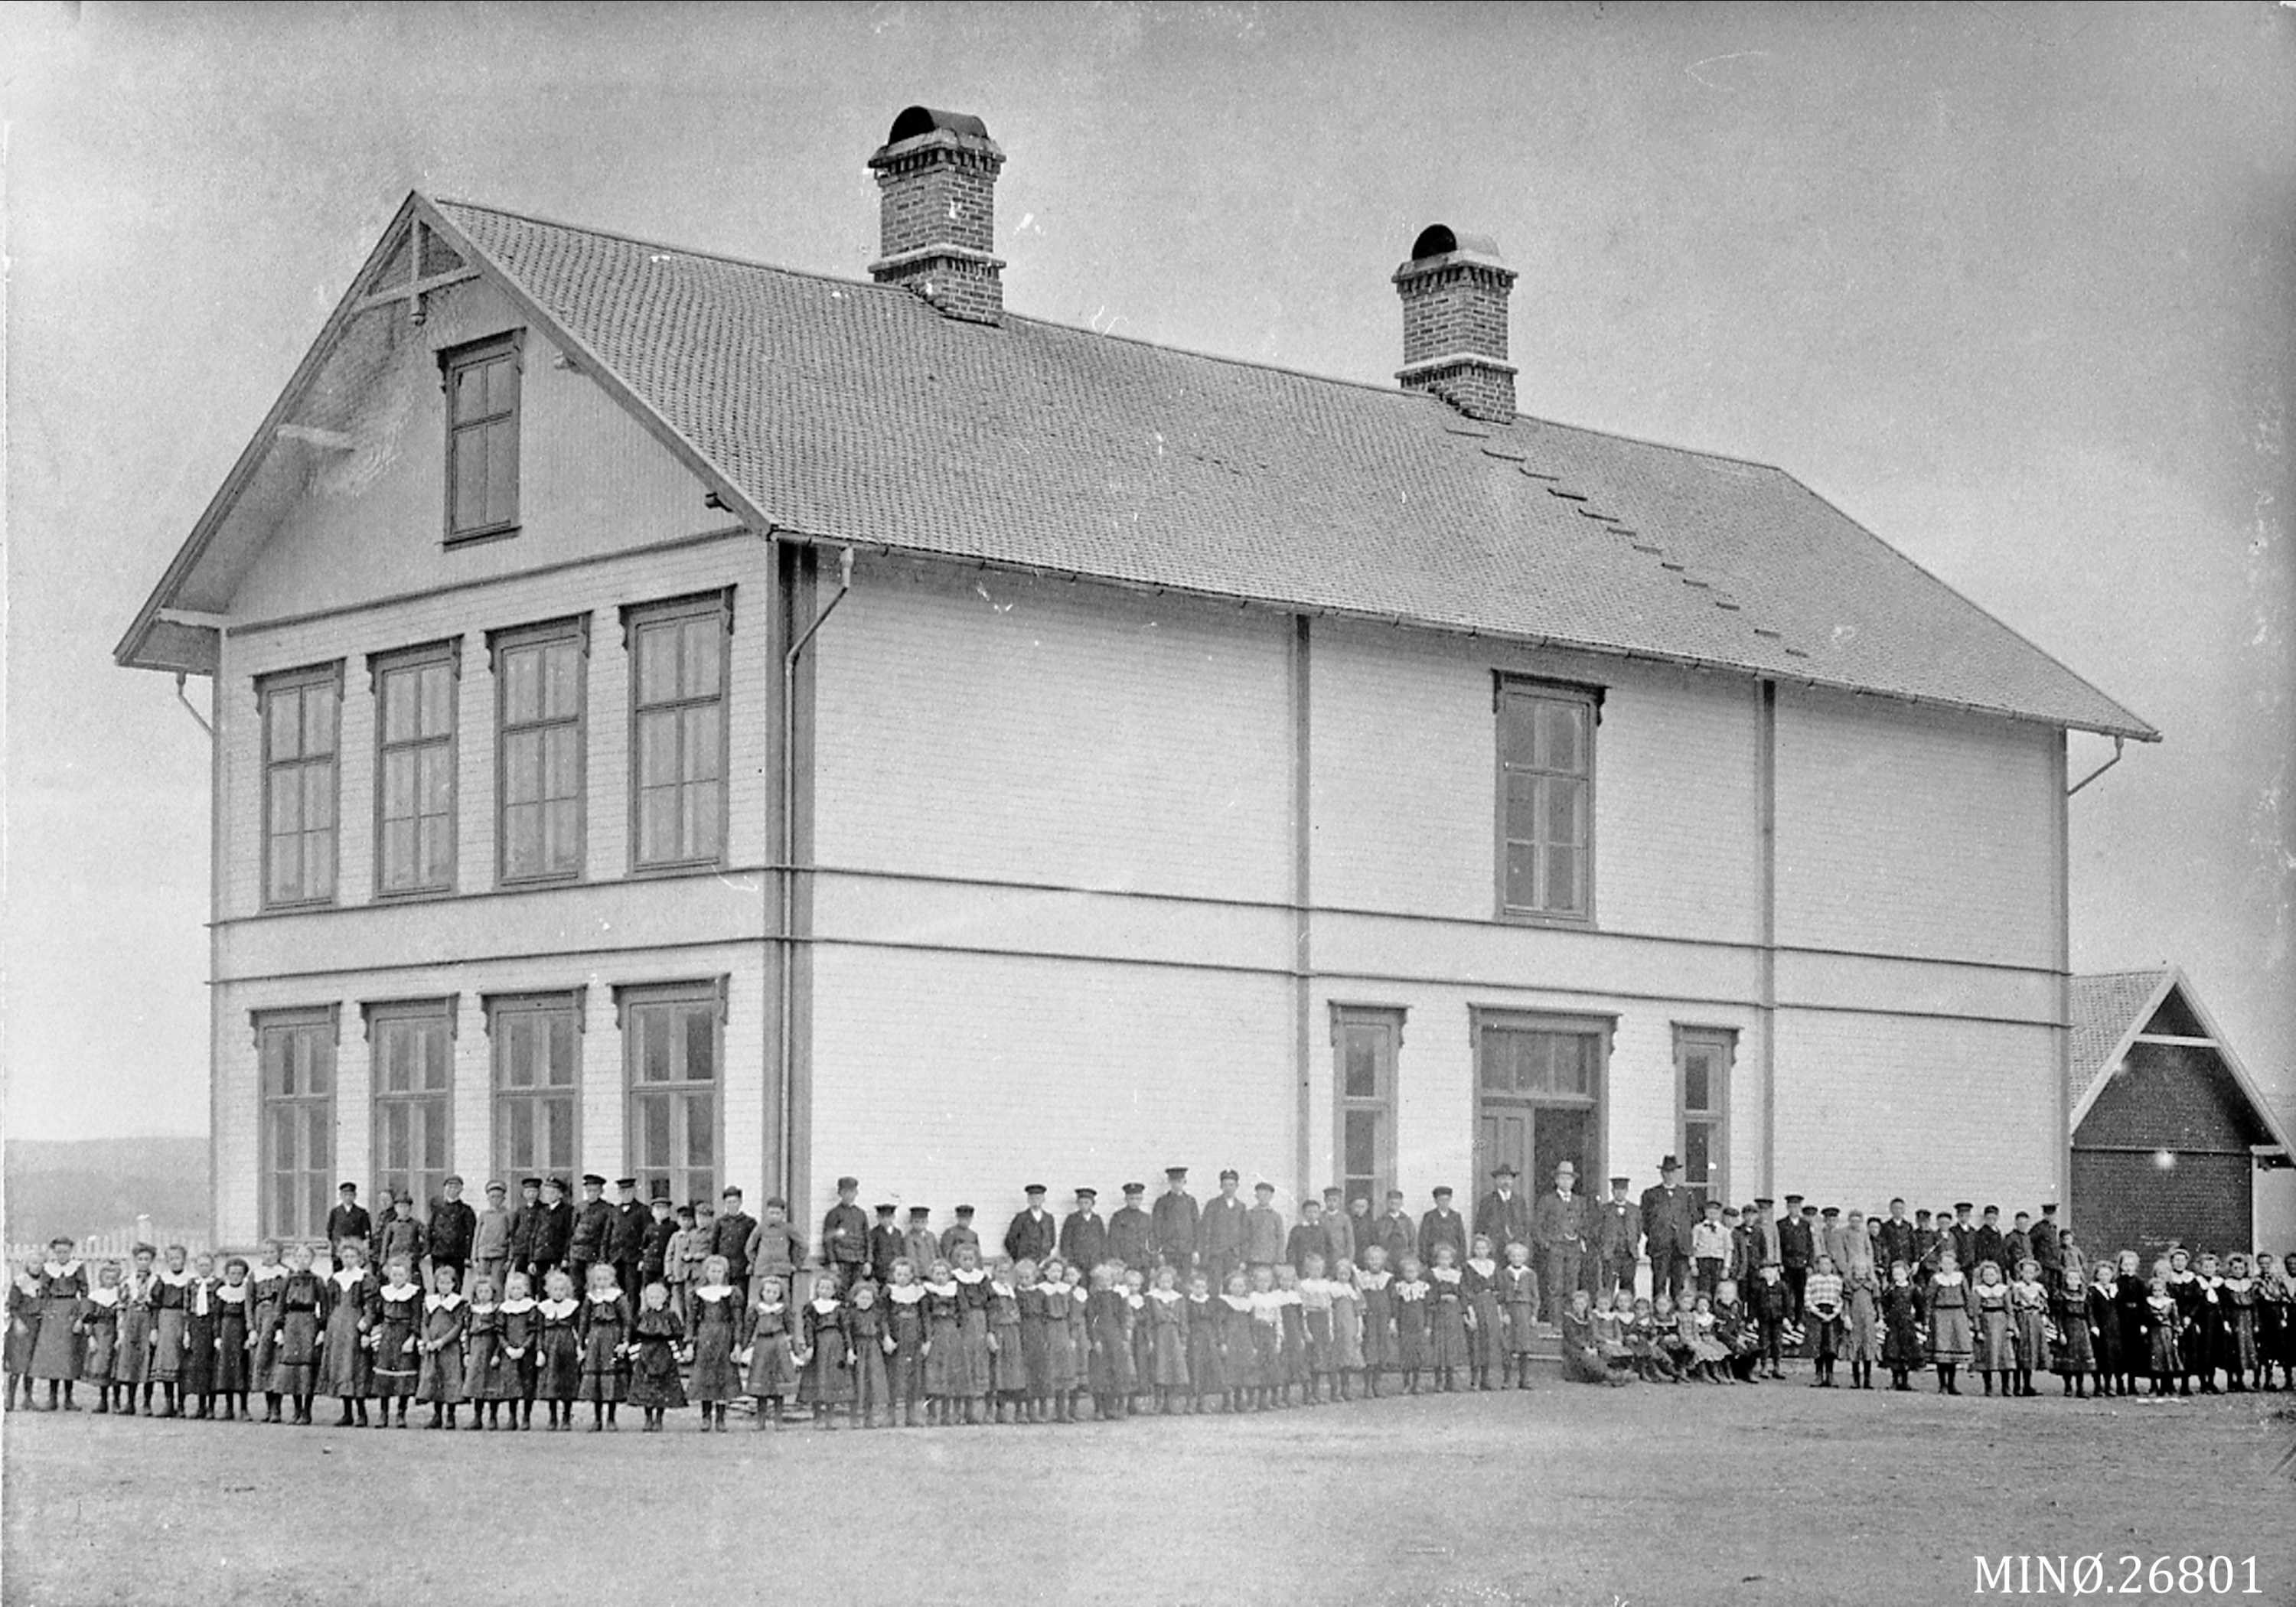 Midtbygda school, Norway 1907. Nordics were late with higher education but a pioneer in public education for all citizens.